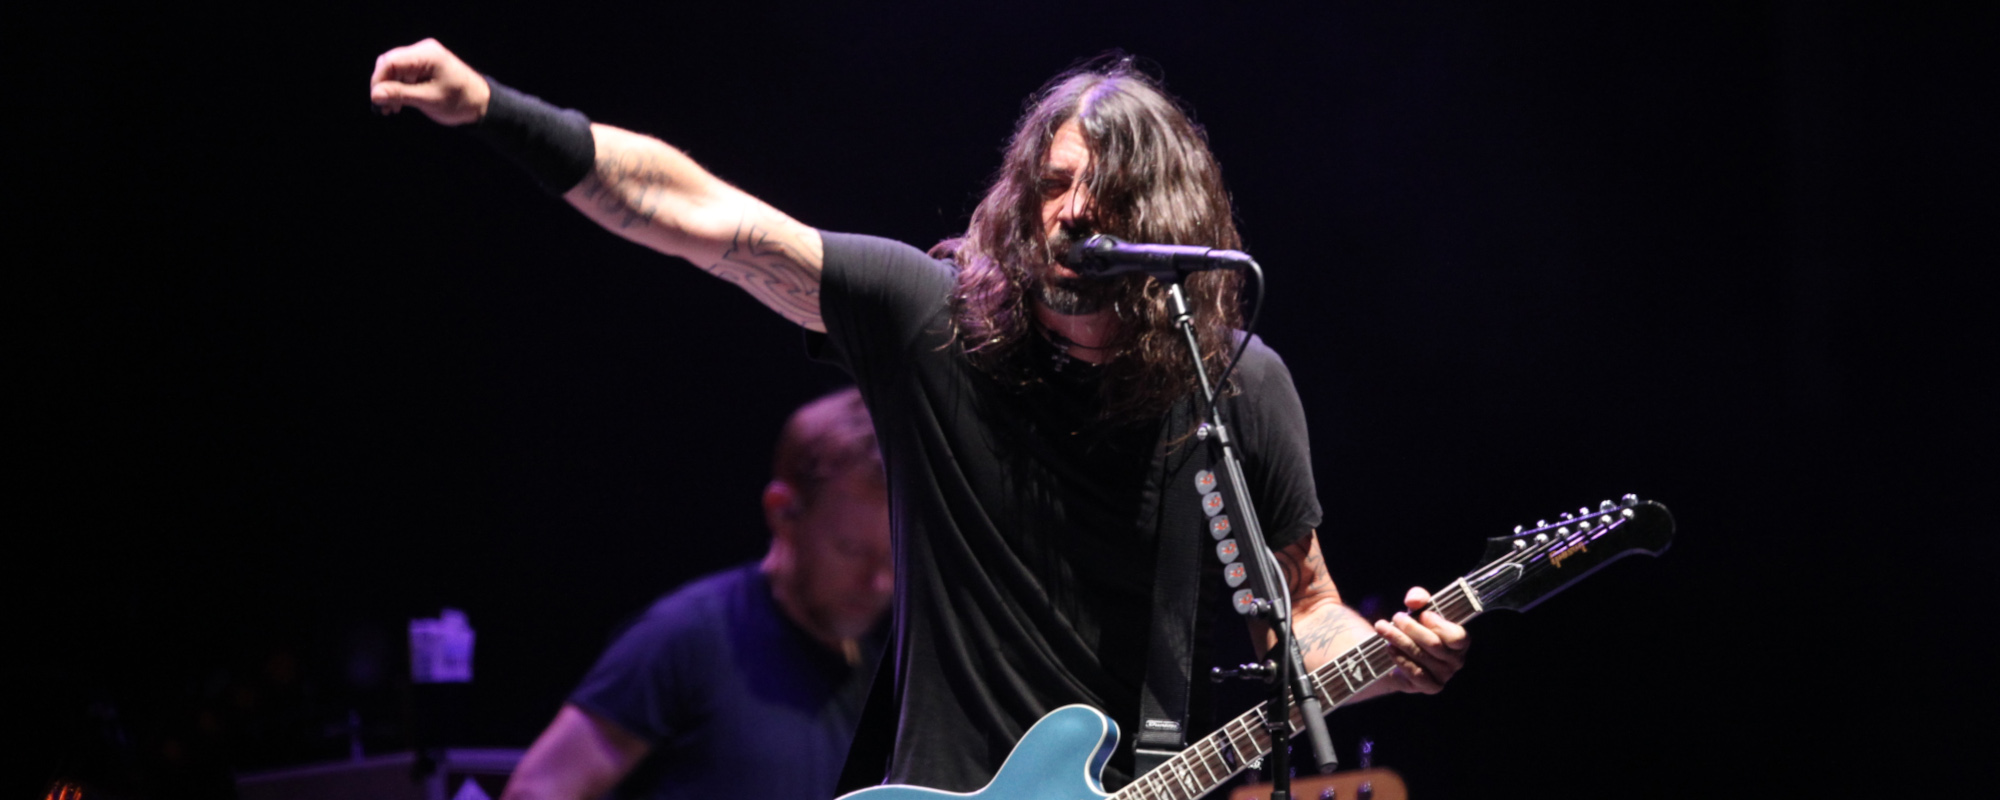 Dave Grohl Shares New Album to Start the New Year